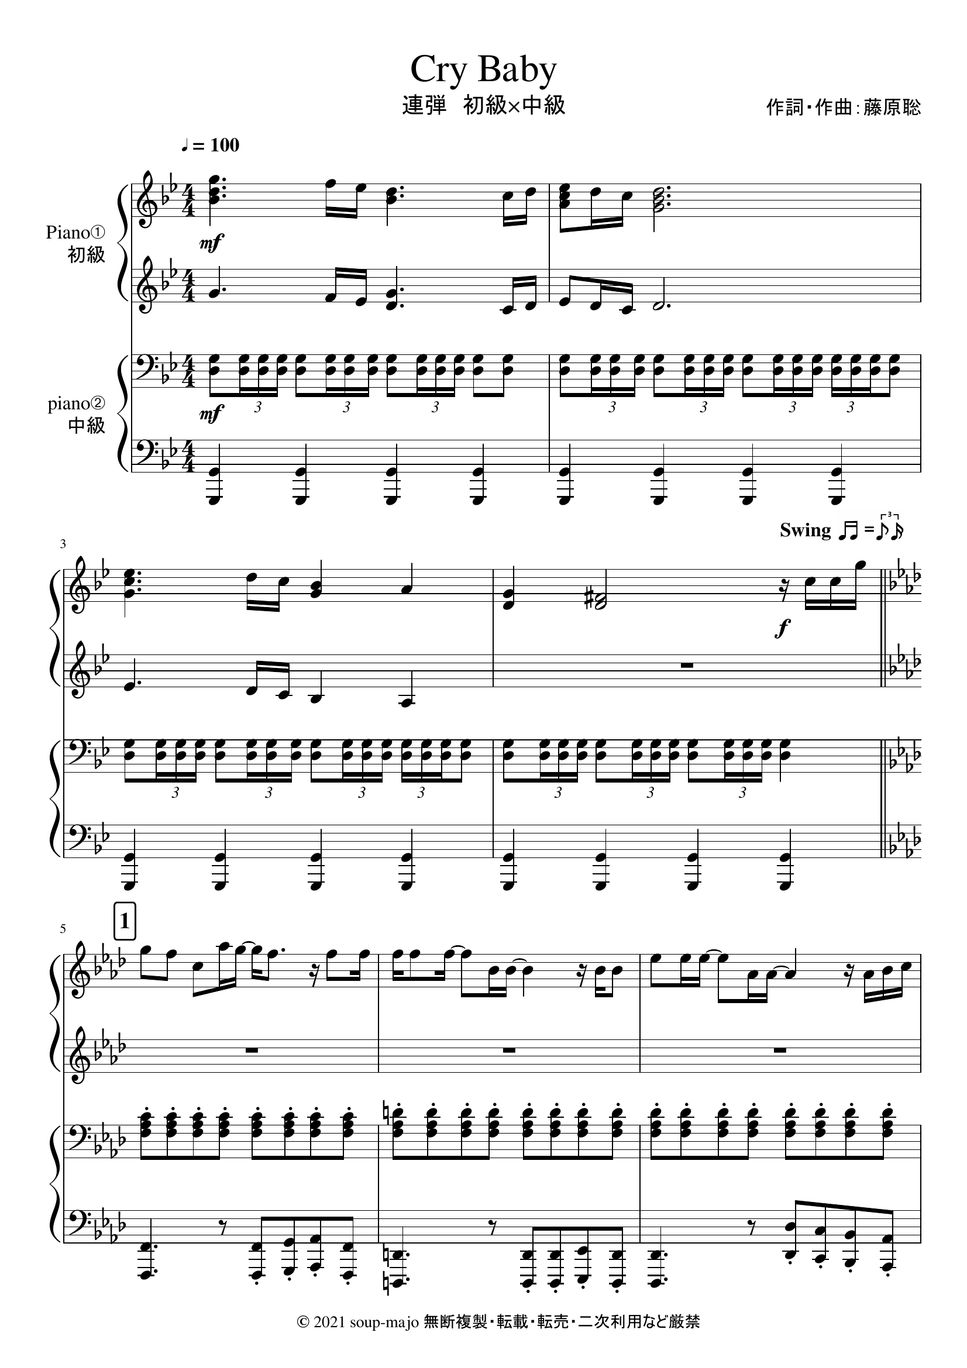 Einde Vooruit Voorbereiding Official HIGE DANdism - 「Cry Baby」Piano 4 Hands Sheet by soup-majo